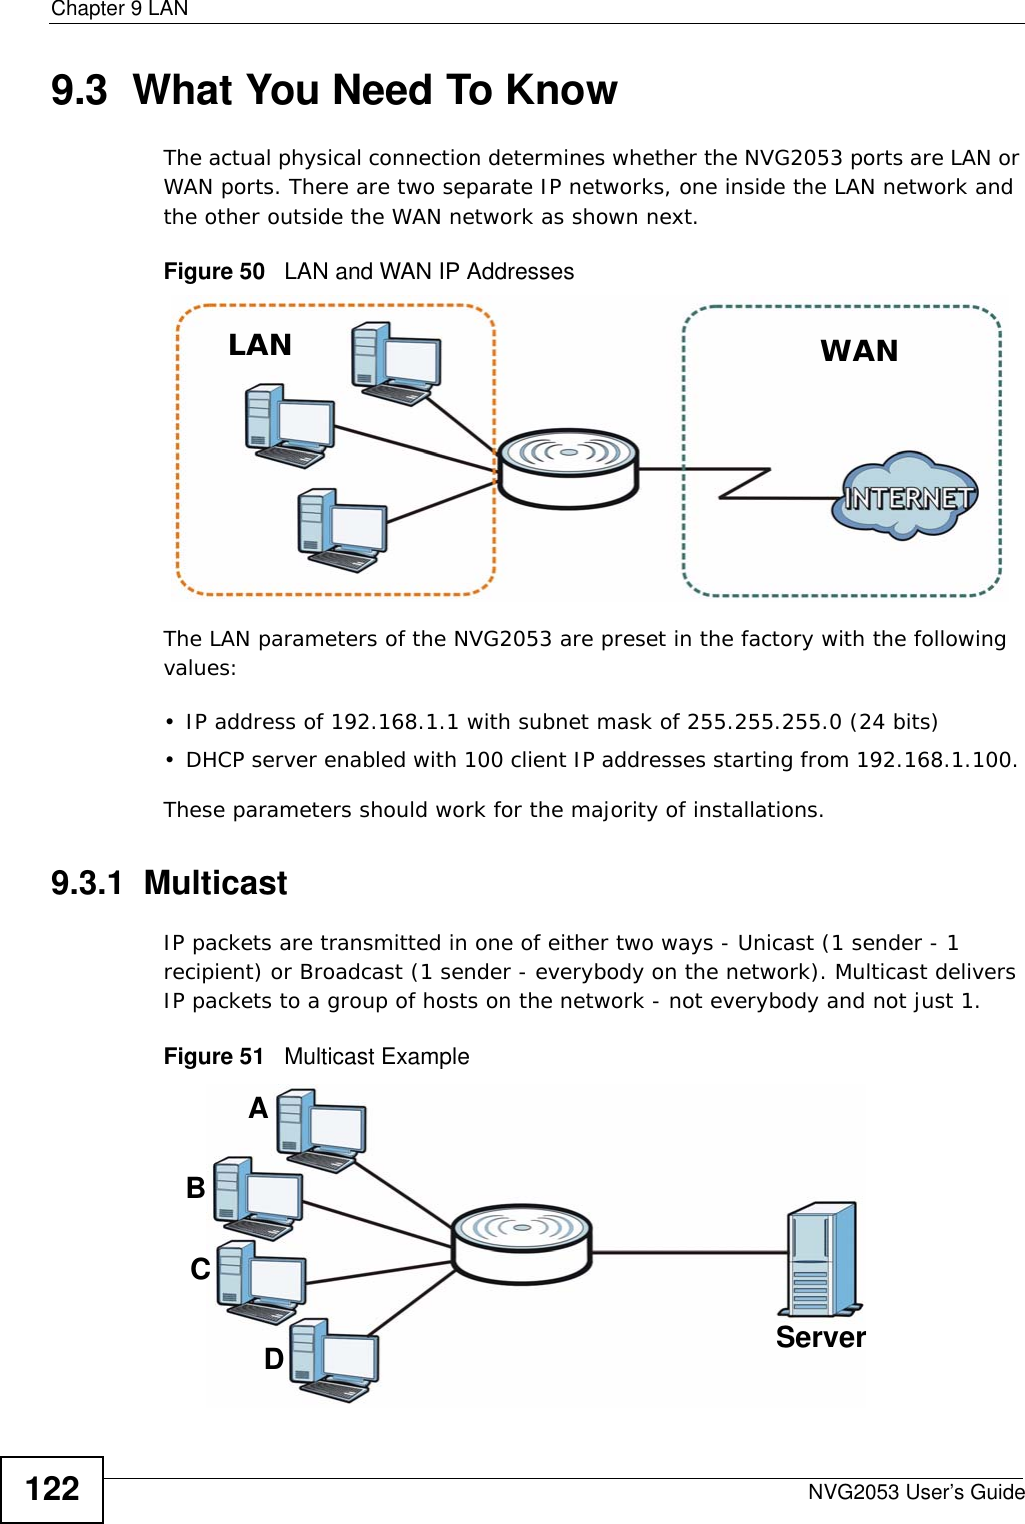 Chapter 9 LANNVG2053 User’s Guide1229.3  What You Need To KnowThe actual physical connection determines whether the NVG2053 ports are LAN or WAN ports. There are two separate IP networks, one inside the LAN network and the other outside the WAN network as shown next.Figure 50   LAN and WAN IP AddressesThe LAN parameters of the NVG2053 are preset in the factory with the following values:• IP address of 192.168.1.1 with subnet mask of 255.255.255.0 (24 bits)• DHCP server enabled with 100 client IP addresses starting from 192.168.1.100. These parameters should work for the majority of installations.9.3.1  MulticastIP packets are transmitted in one of either two ways - Unicast (1 sender - 1 recipient) or Broadcast (1 sender - everybody on the network). Multicast delivers IP packets to a group of hosts on the network - not everybody and not just 1. Figure 51   Multicast ExampleLAN WANABCDServer